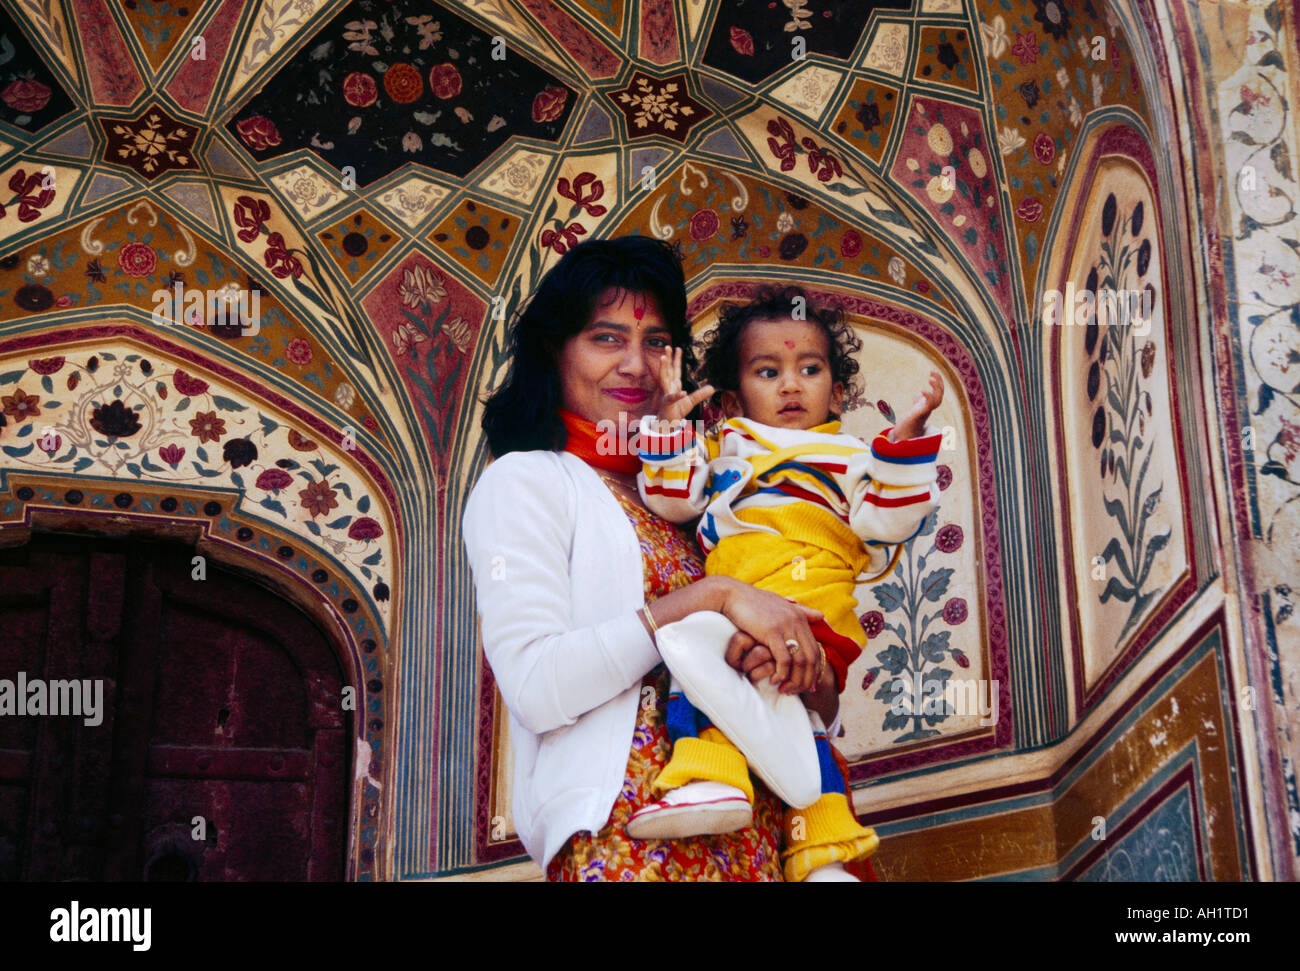 Jaipur India Amber Palace Woman And Young Child Have Red Spot On Forehead Stock Photo